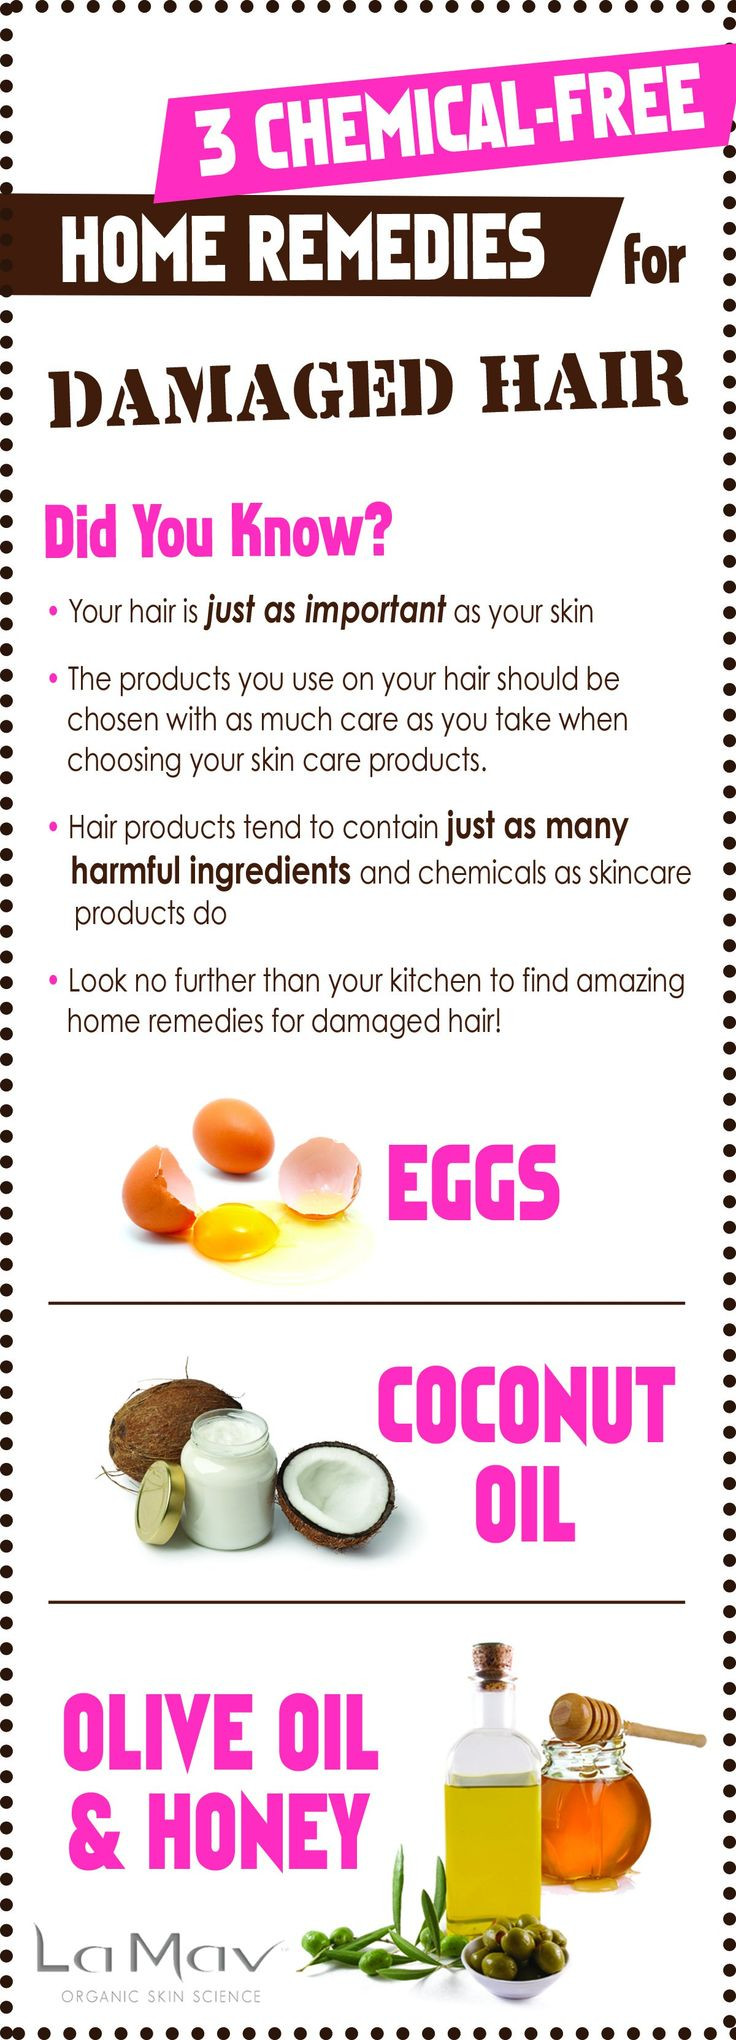 DIY Treatment For Damaged Hair
 3 Chemical Free Home Reme s for Damaged Hair